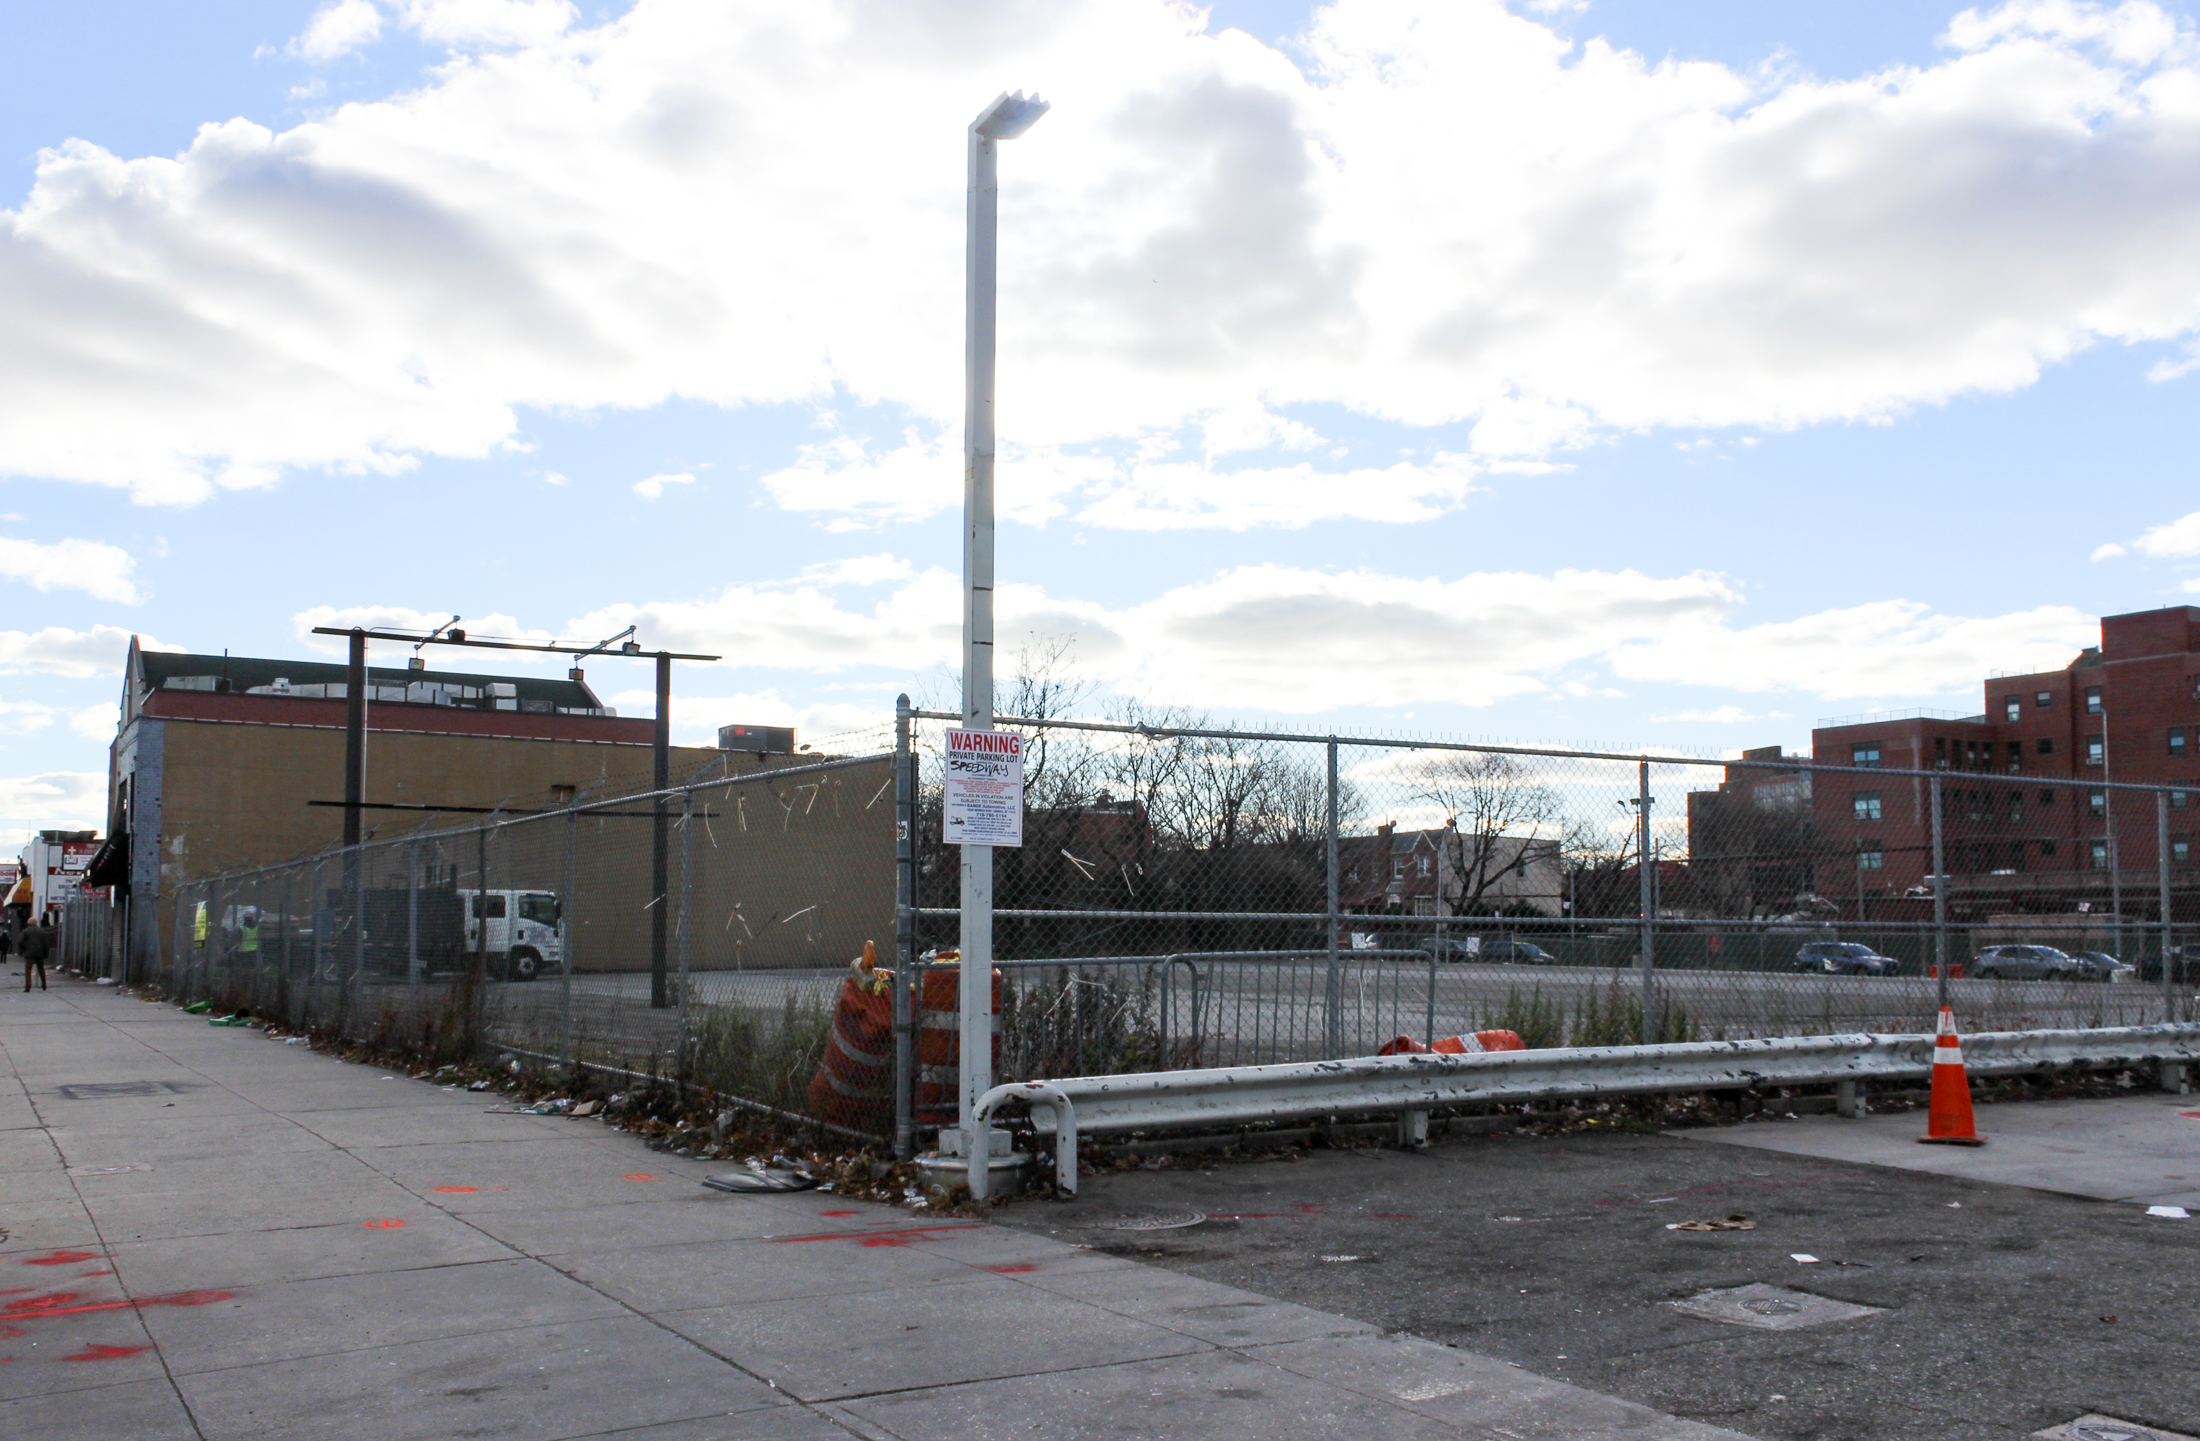 Utica Crescent to be built on this parking lot